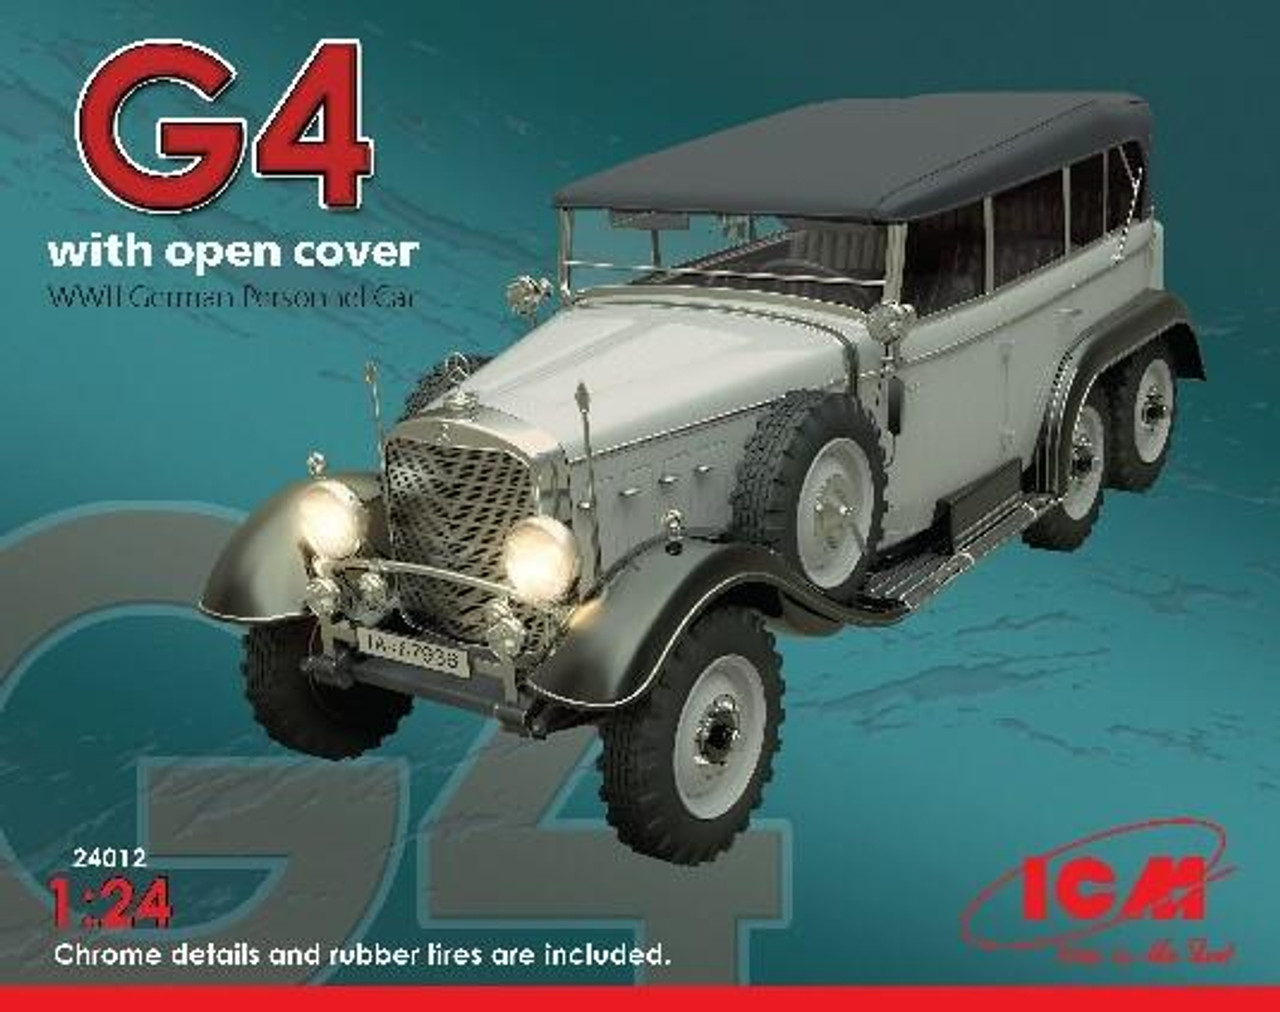 ICM24012 1/24 ICM Typ G4 Soft Top, WWII German Personnel Car MMD Squadron